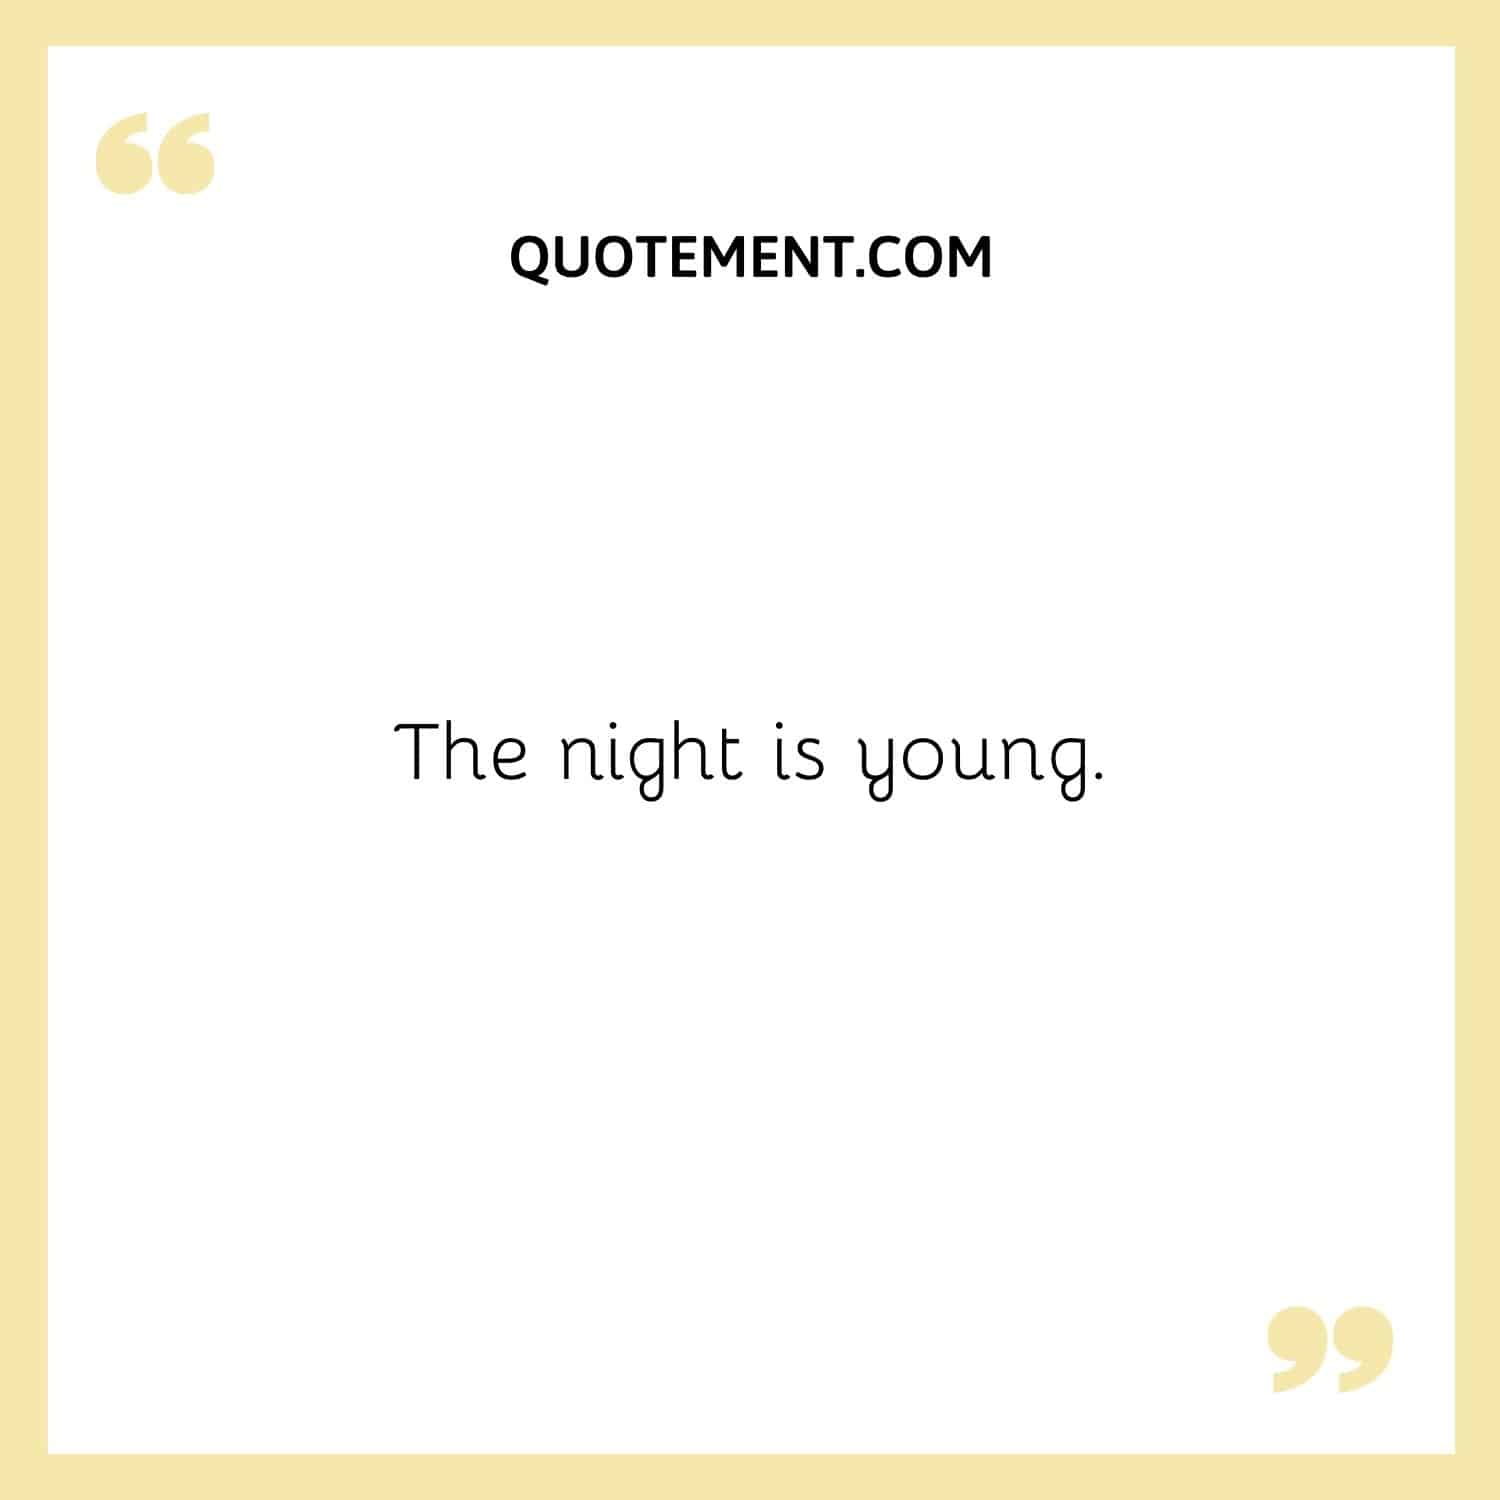 The night is young.